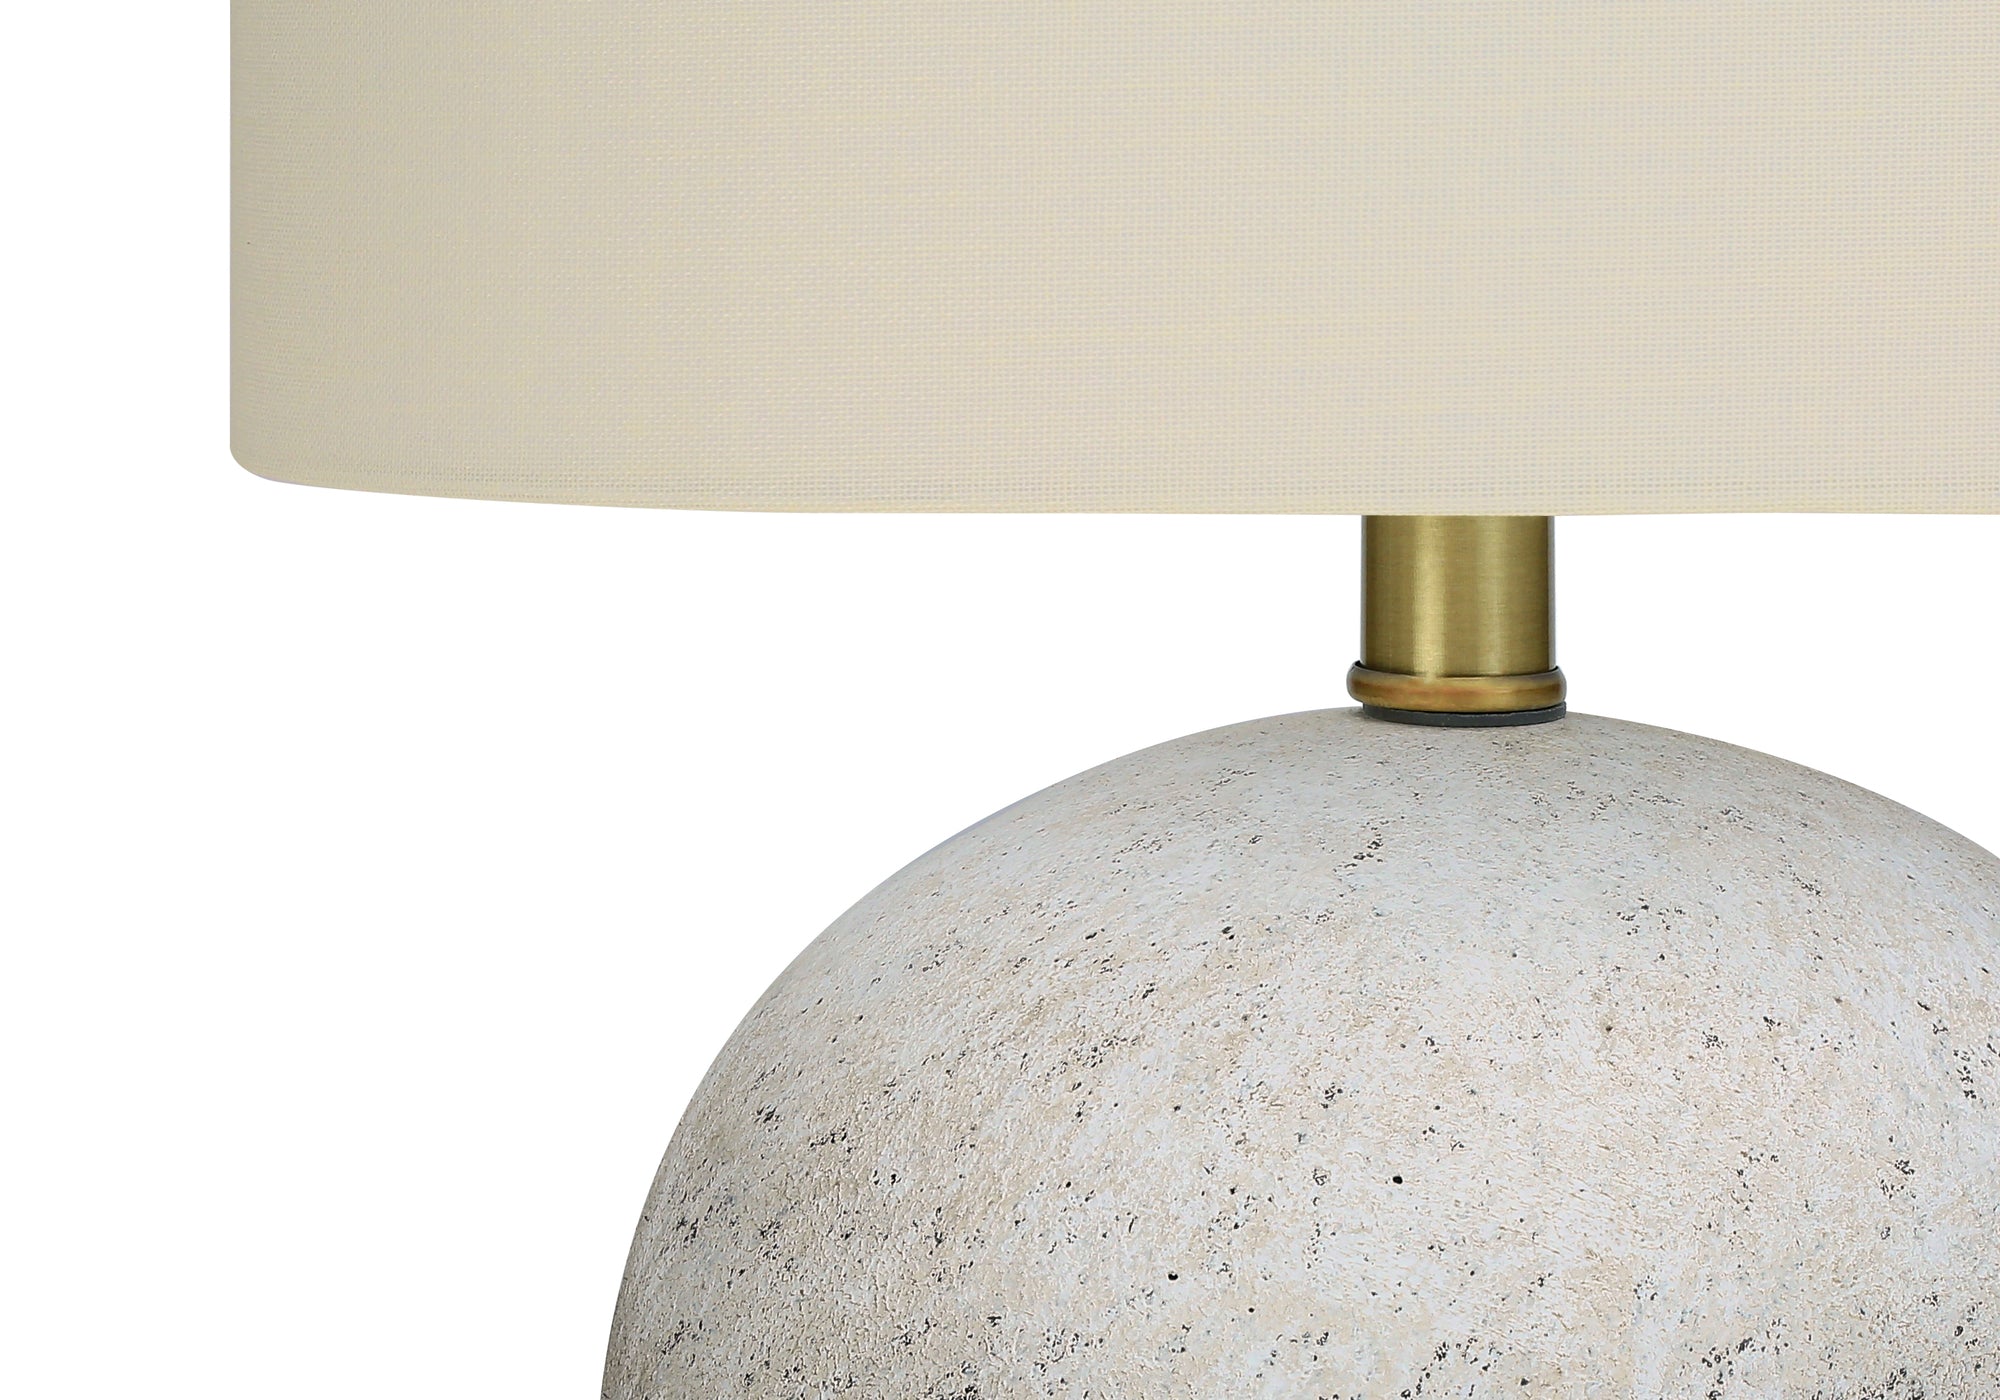 MN-519717    Lighting, 20"H, Table Lamp, Grey Concrete, Ivory / Cream Shade, Contemporary